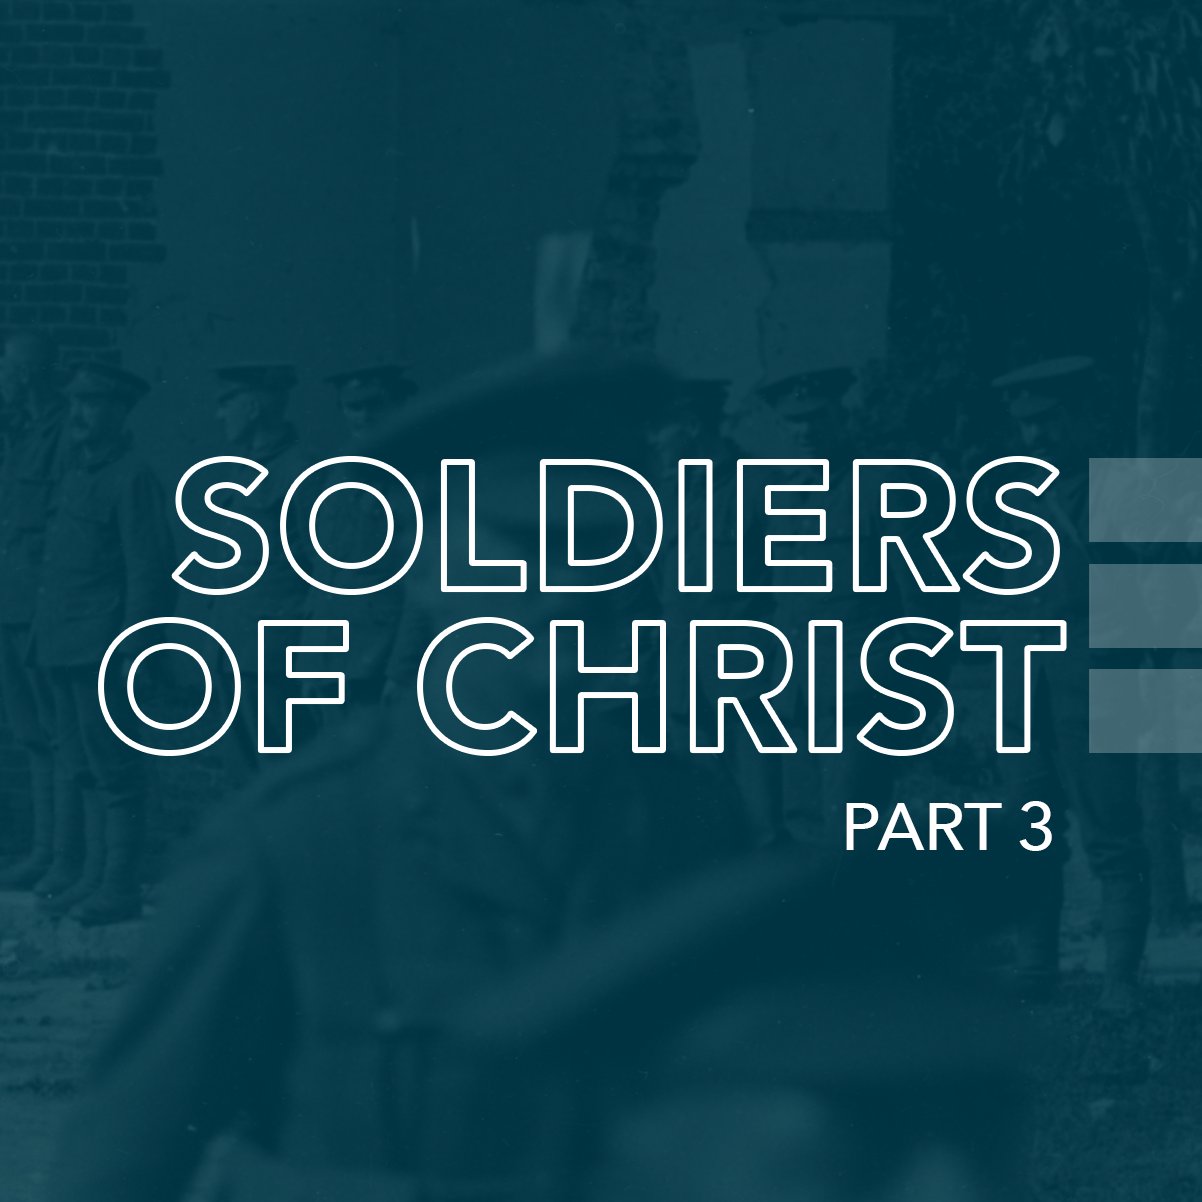 Soldiers of Christ, Part 3